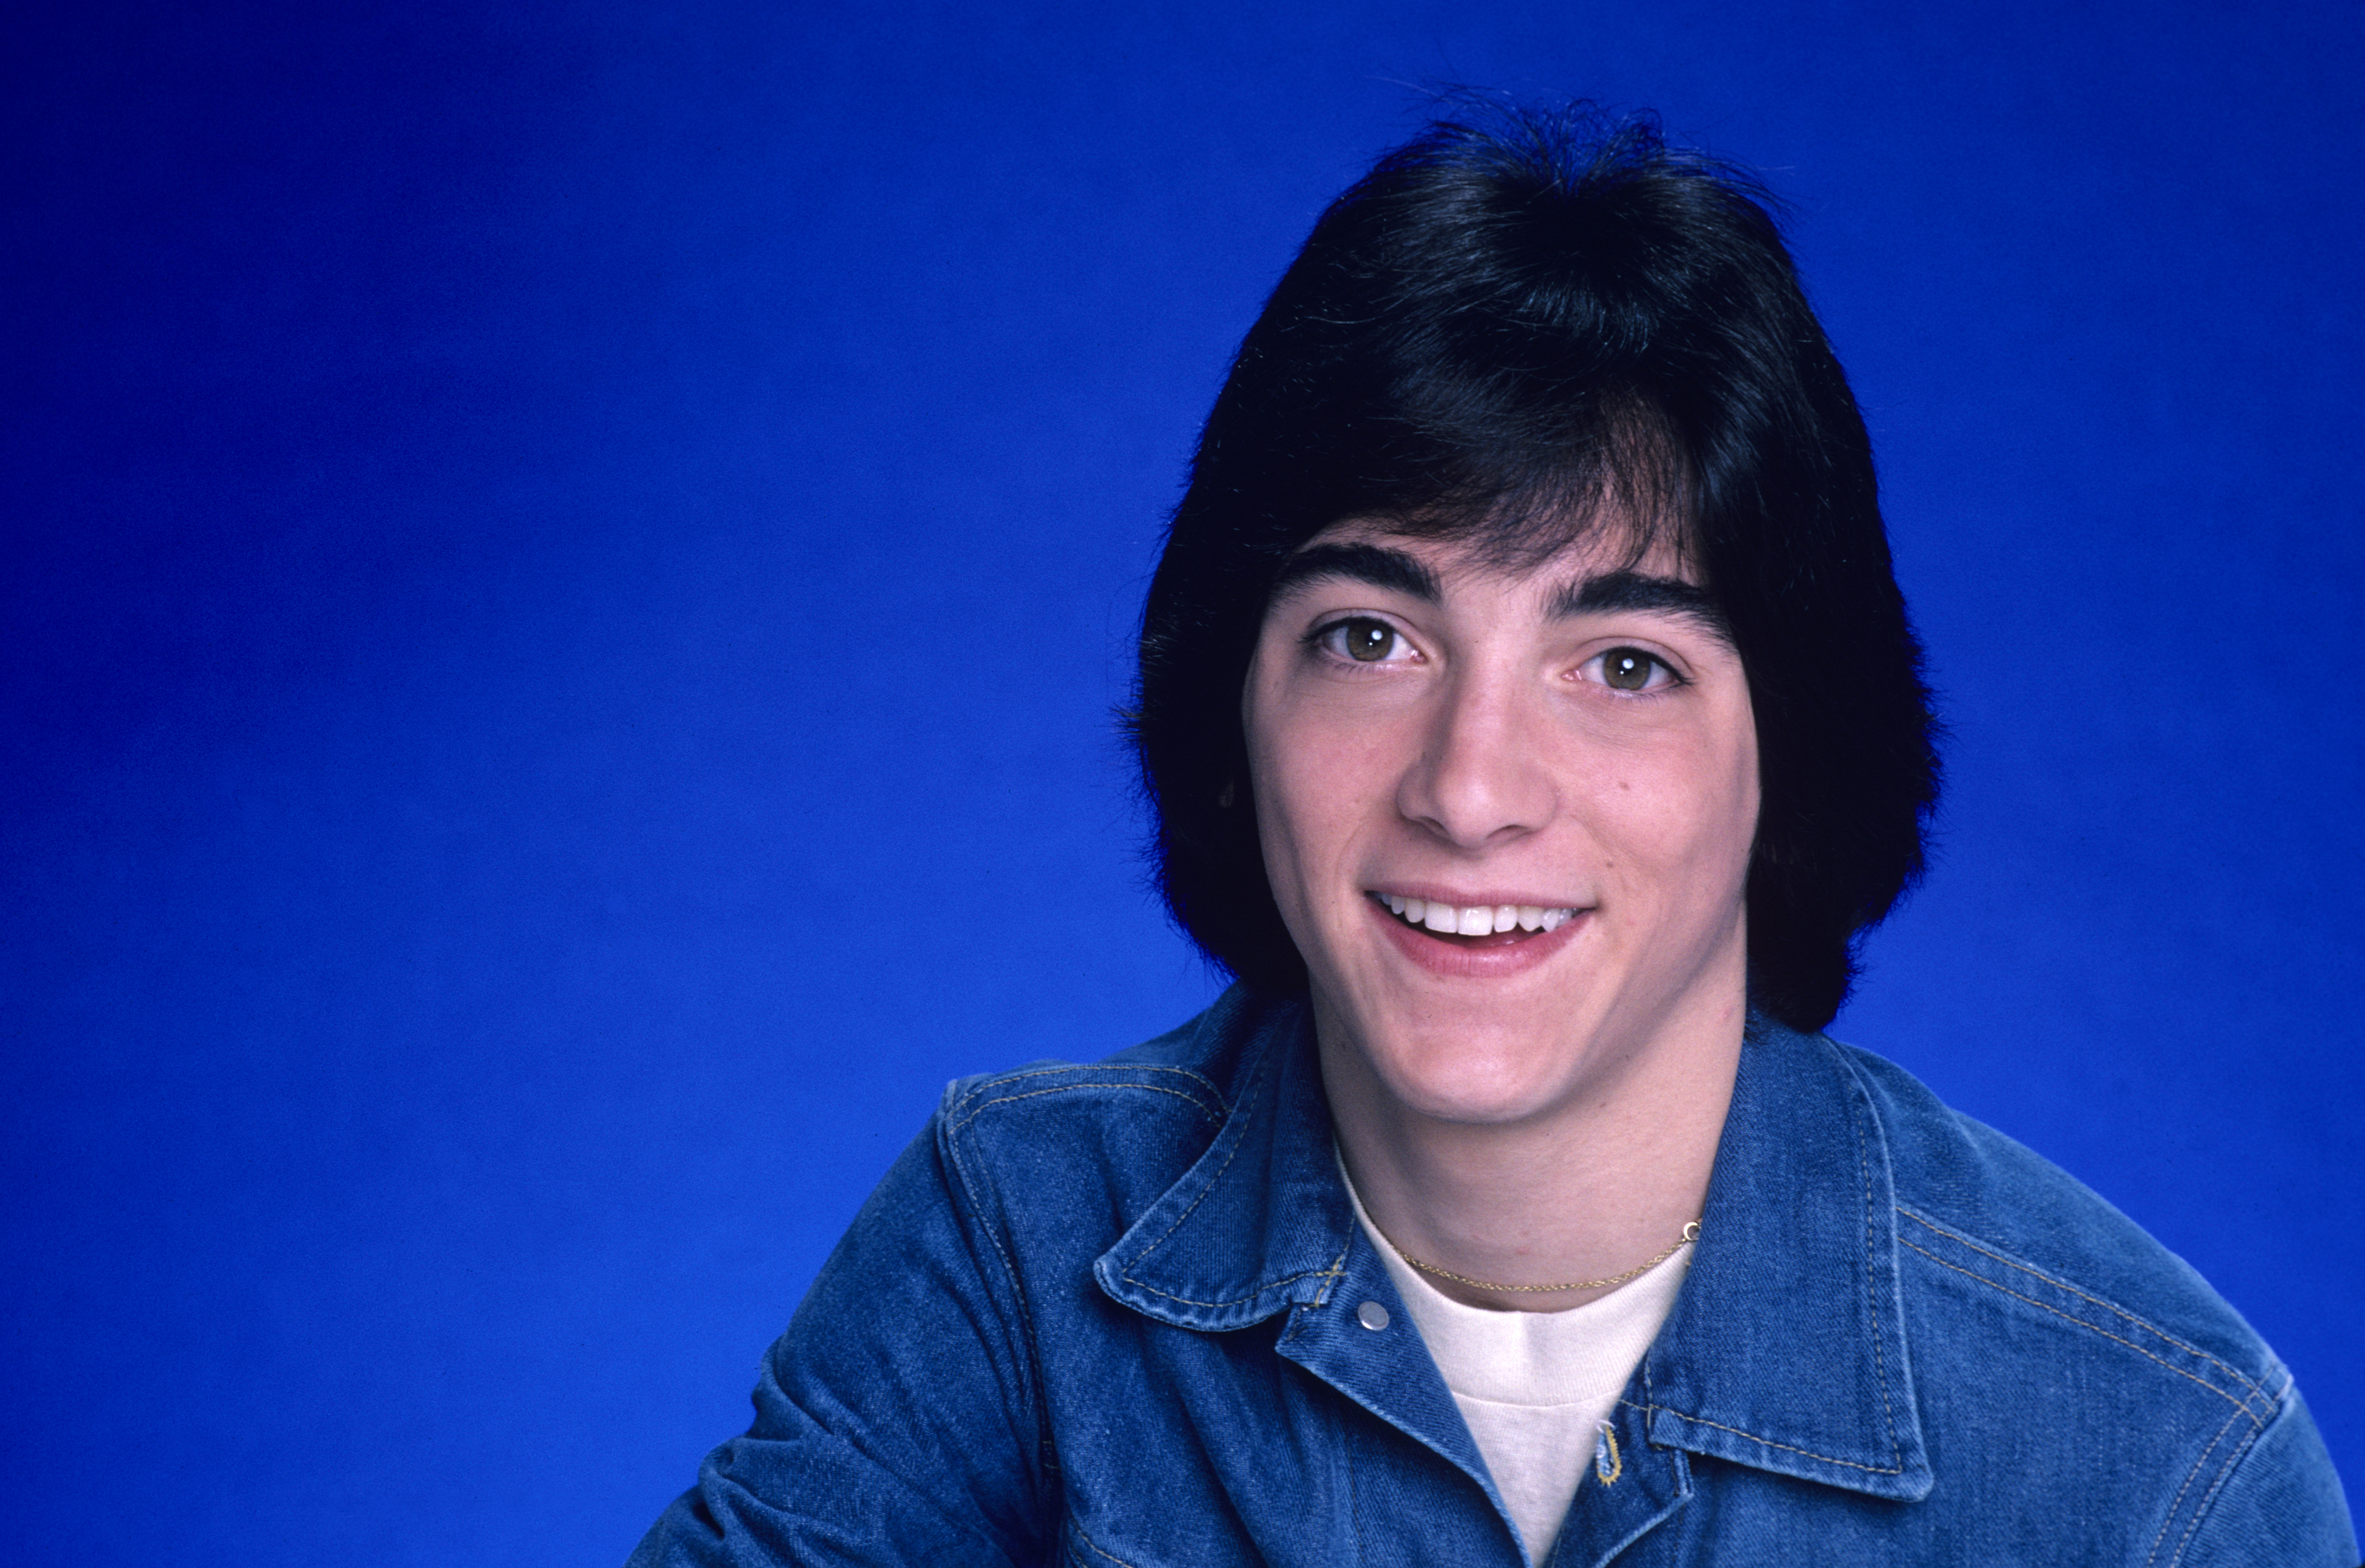 Scott Baio on "Happy Days" in 1982 | Source: Getty Images